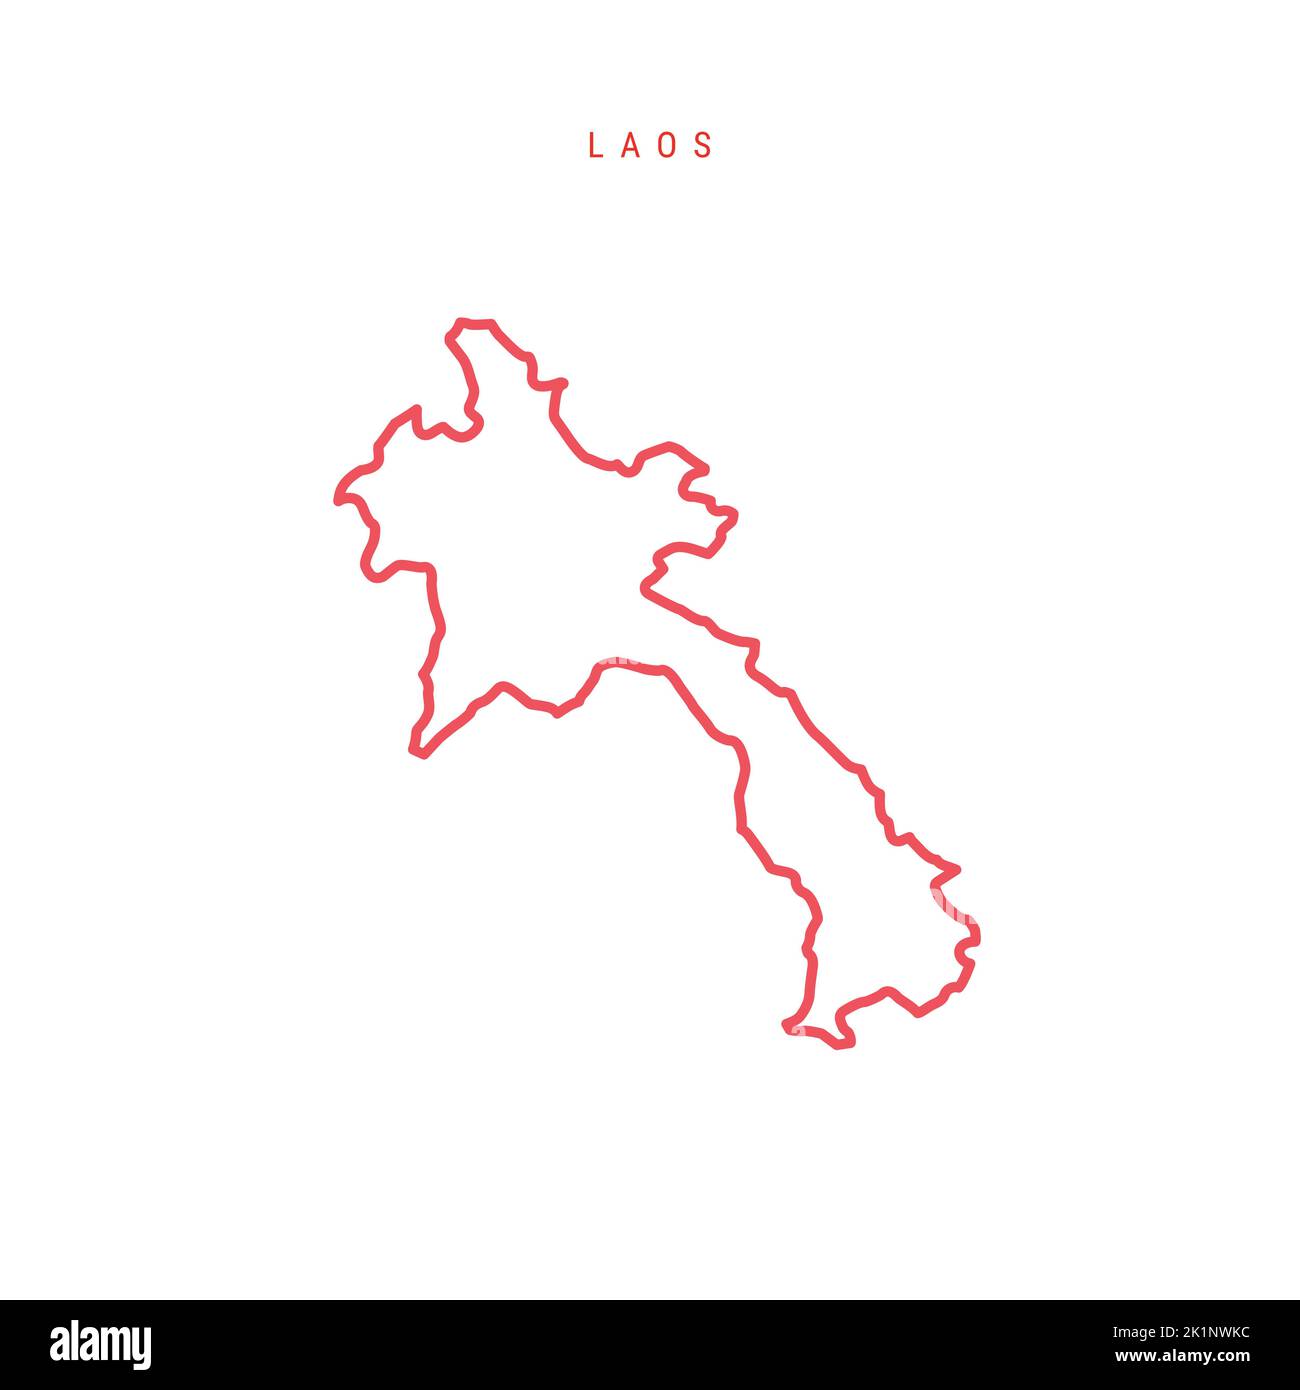 Laos editable outline map. Laotian red border. Country name. Adjust line weight. Change to any color. Vector illustration. Stock Vector